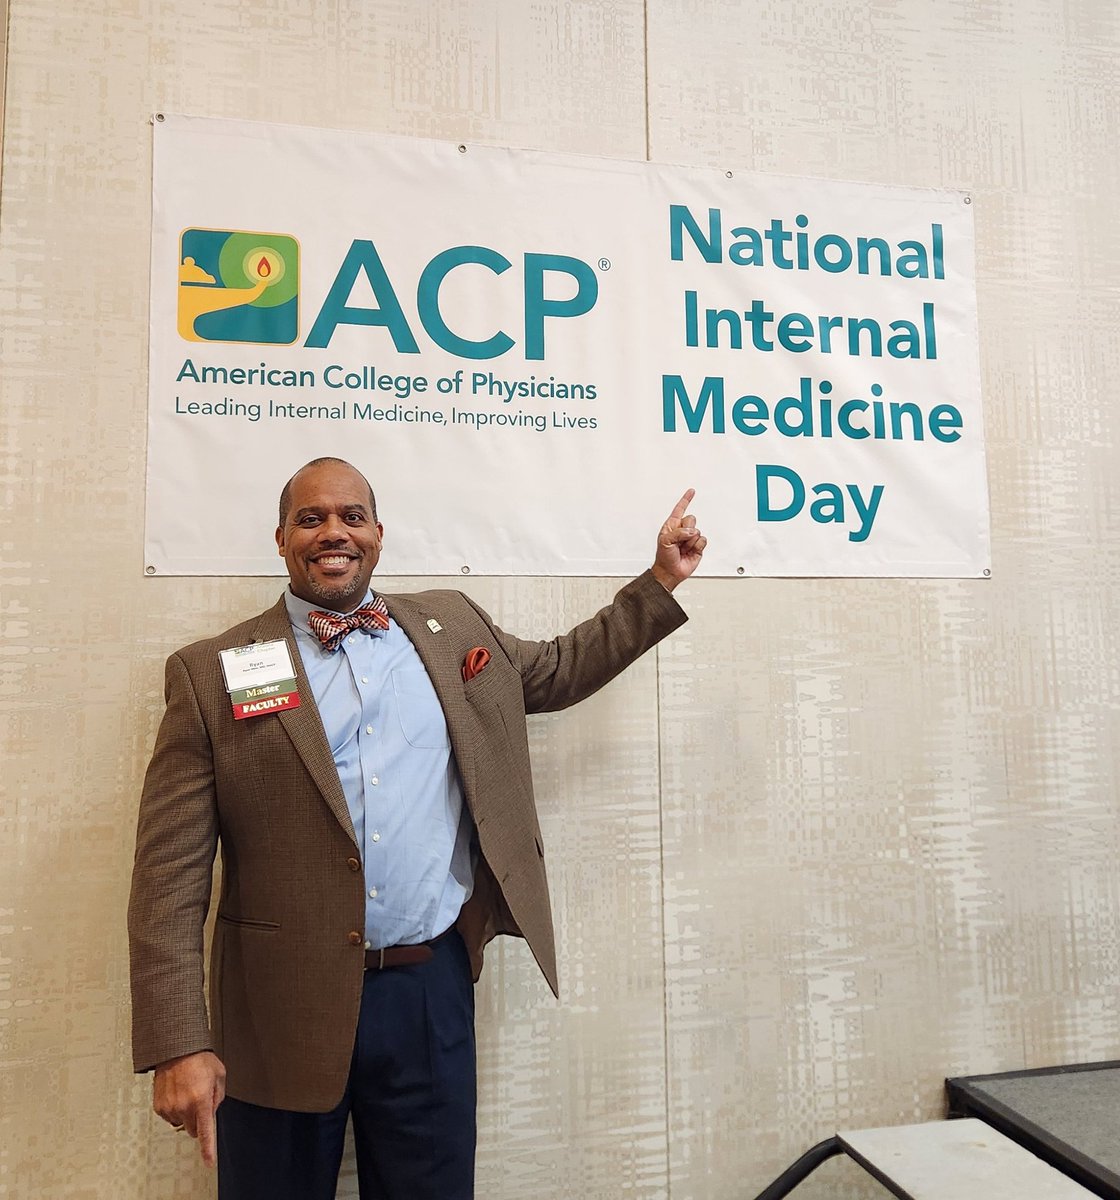 I spent my #NationalInternalMedicineDay with a room full of dedicated #InternalMedicine physicians of the @ArizonaACP chapter scientific meeting. @DocPhx, thank you for the invite & hospitality!